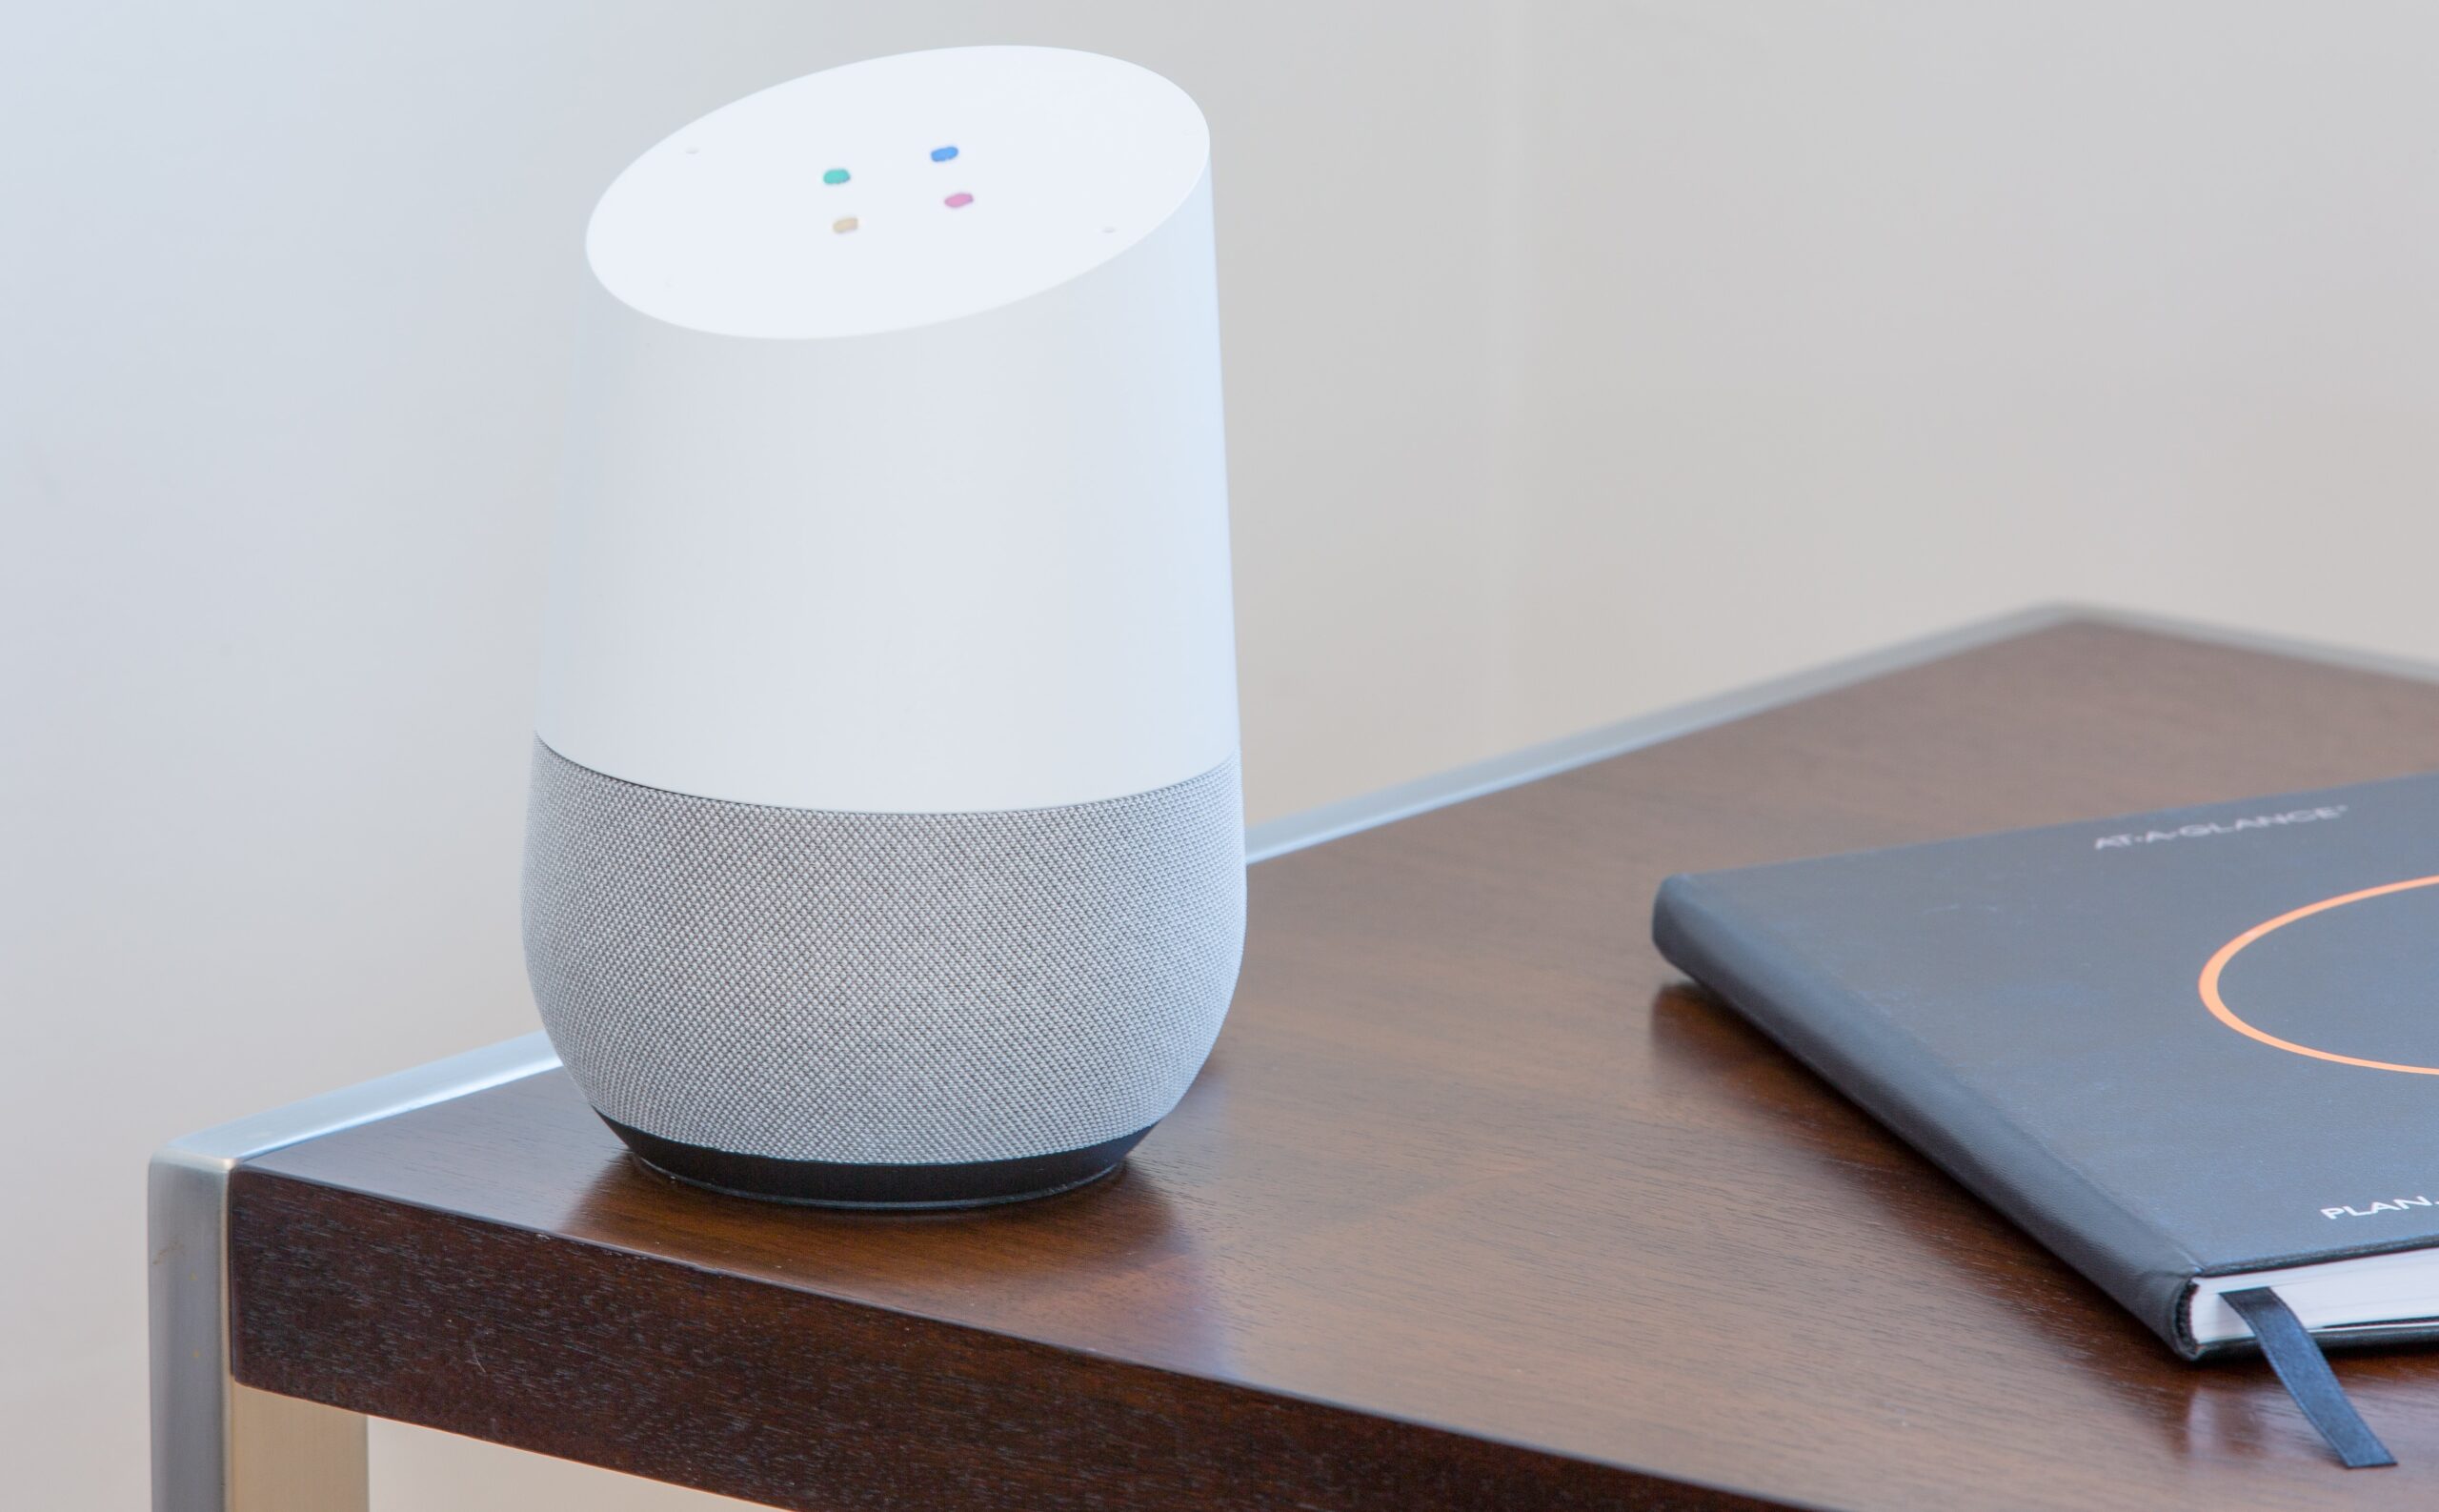 How To Set Up Parental Controls On Google Smart Speakers